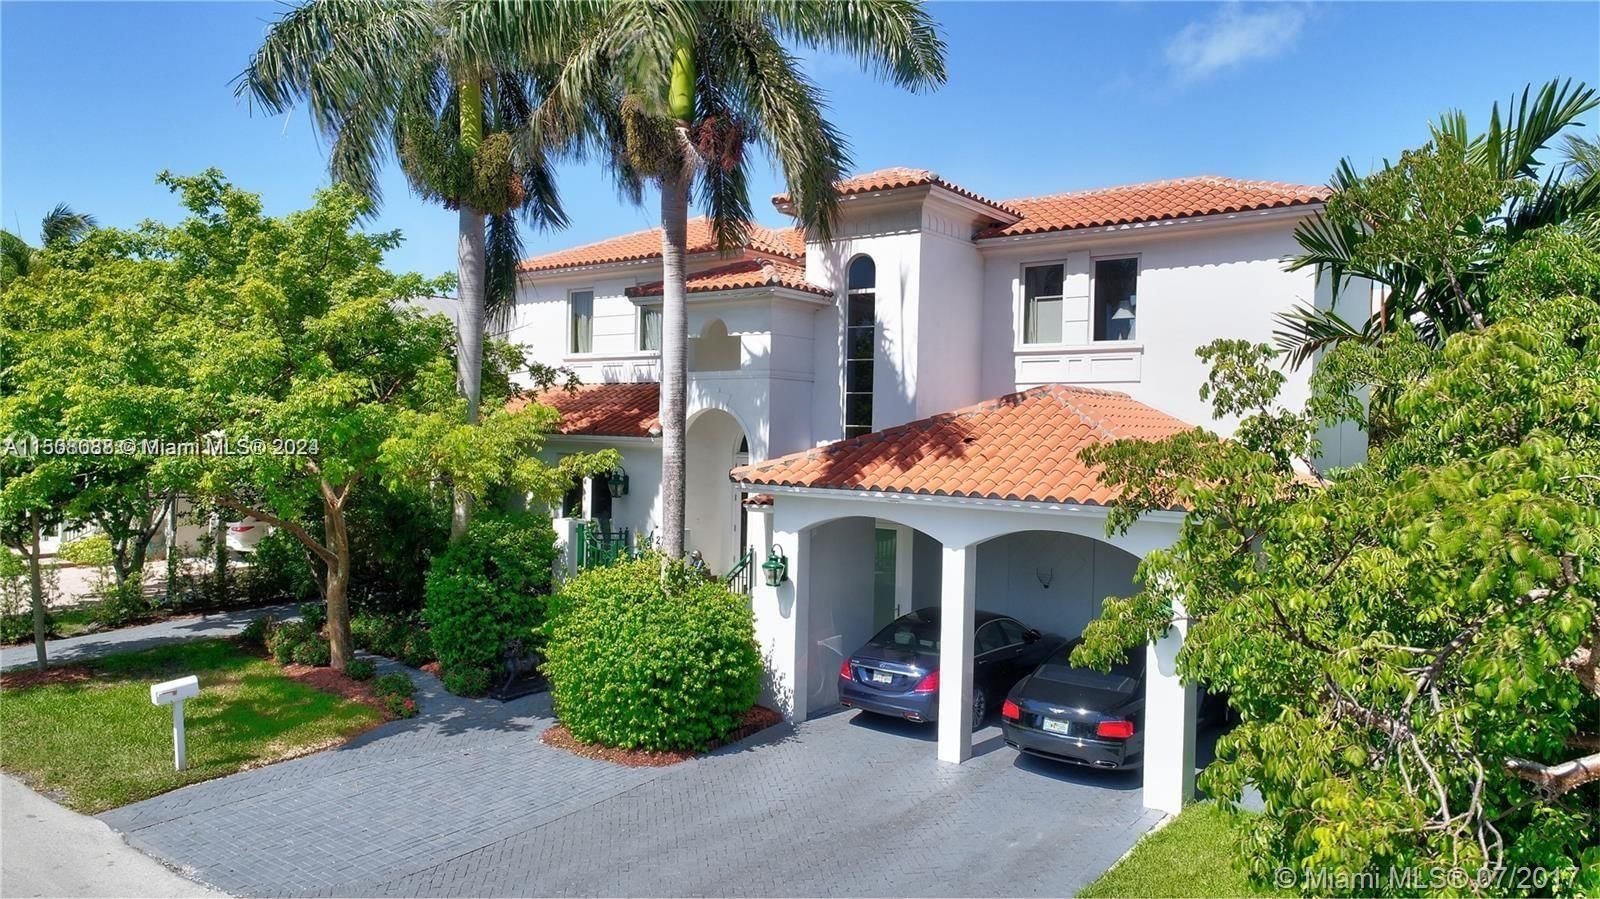 Real estate property located at 270 Ridgewood rd, Miami-Dade County, TROPICAL ISLE HOMES, Key Biscayne, FL